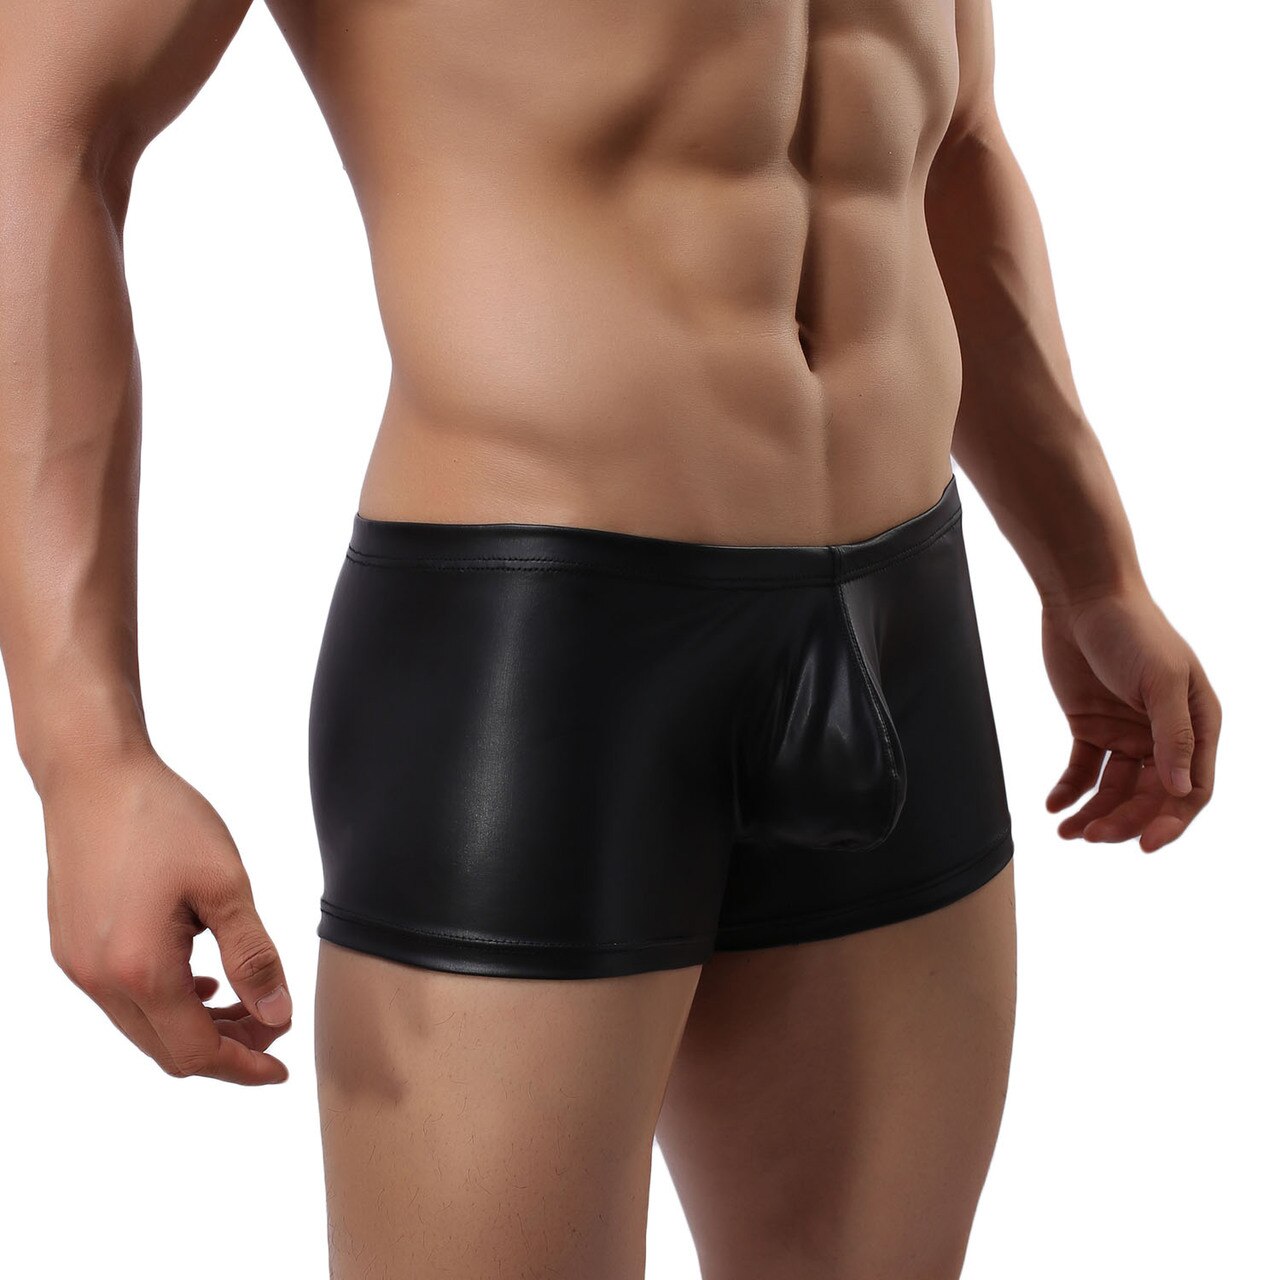 Mens Wetlook Boxer Shorts with Pouch Front Black